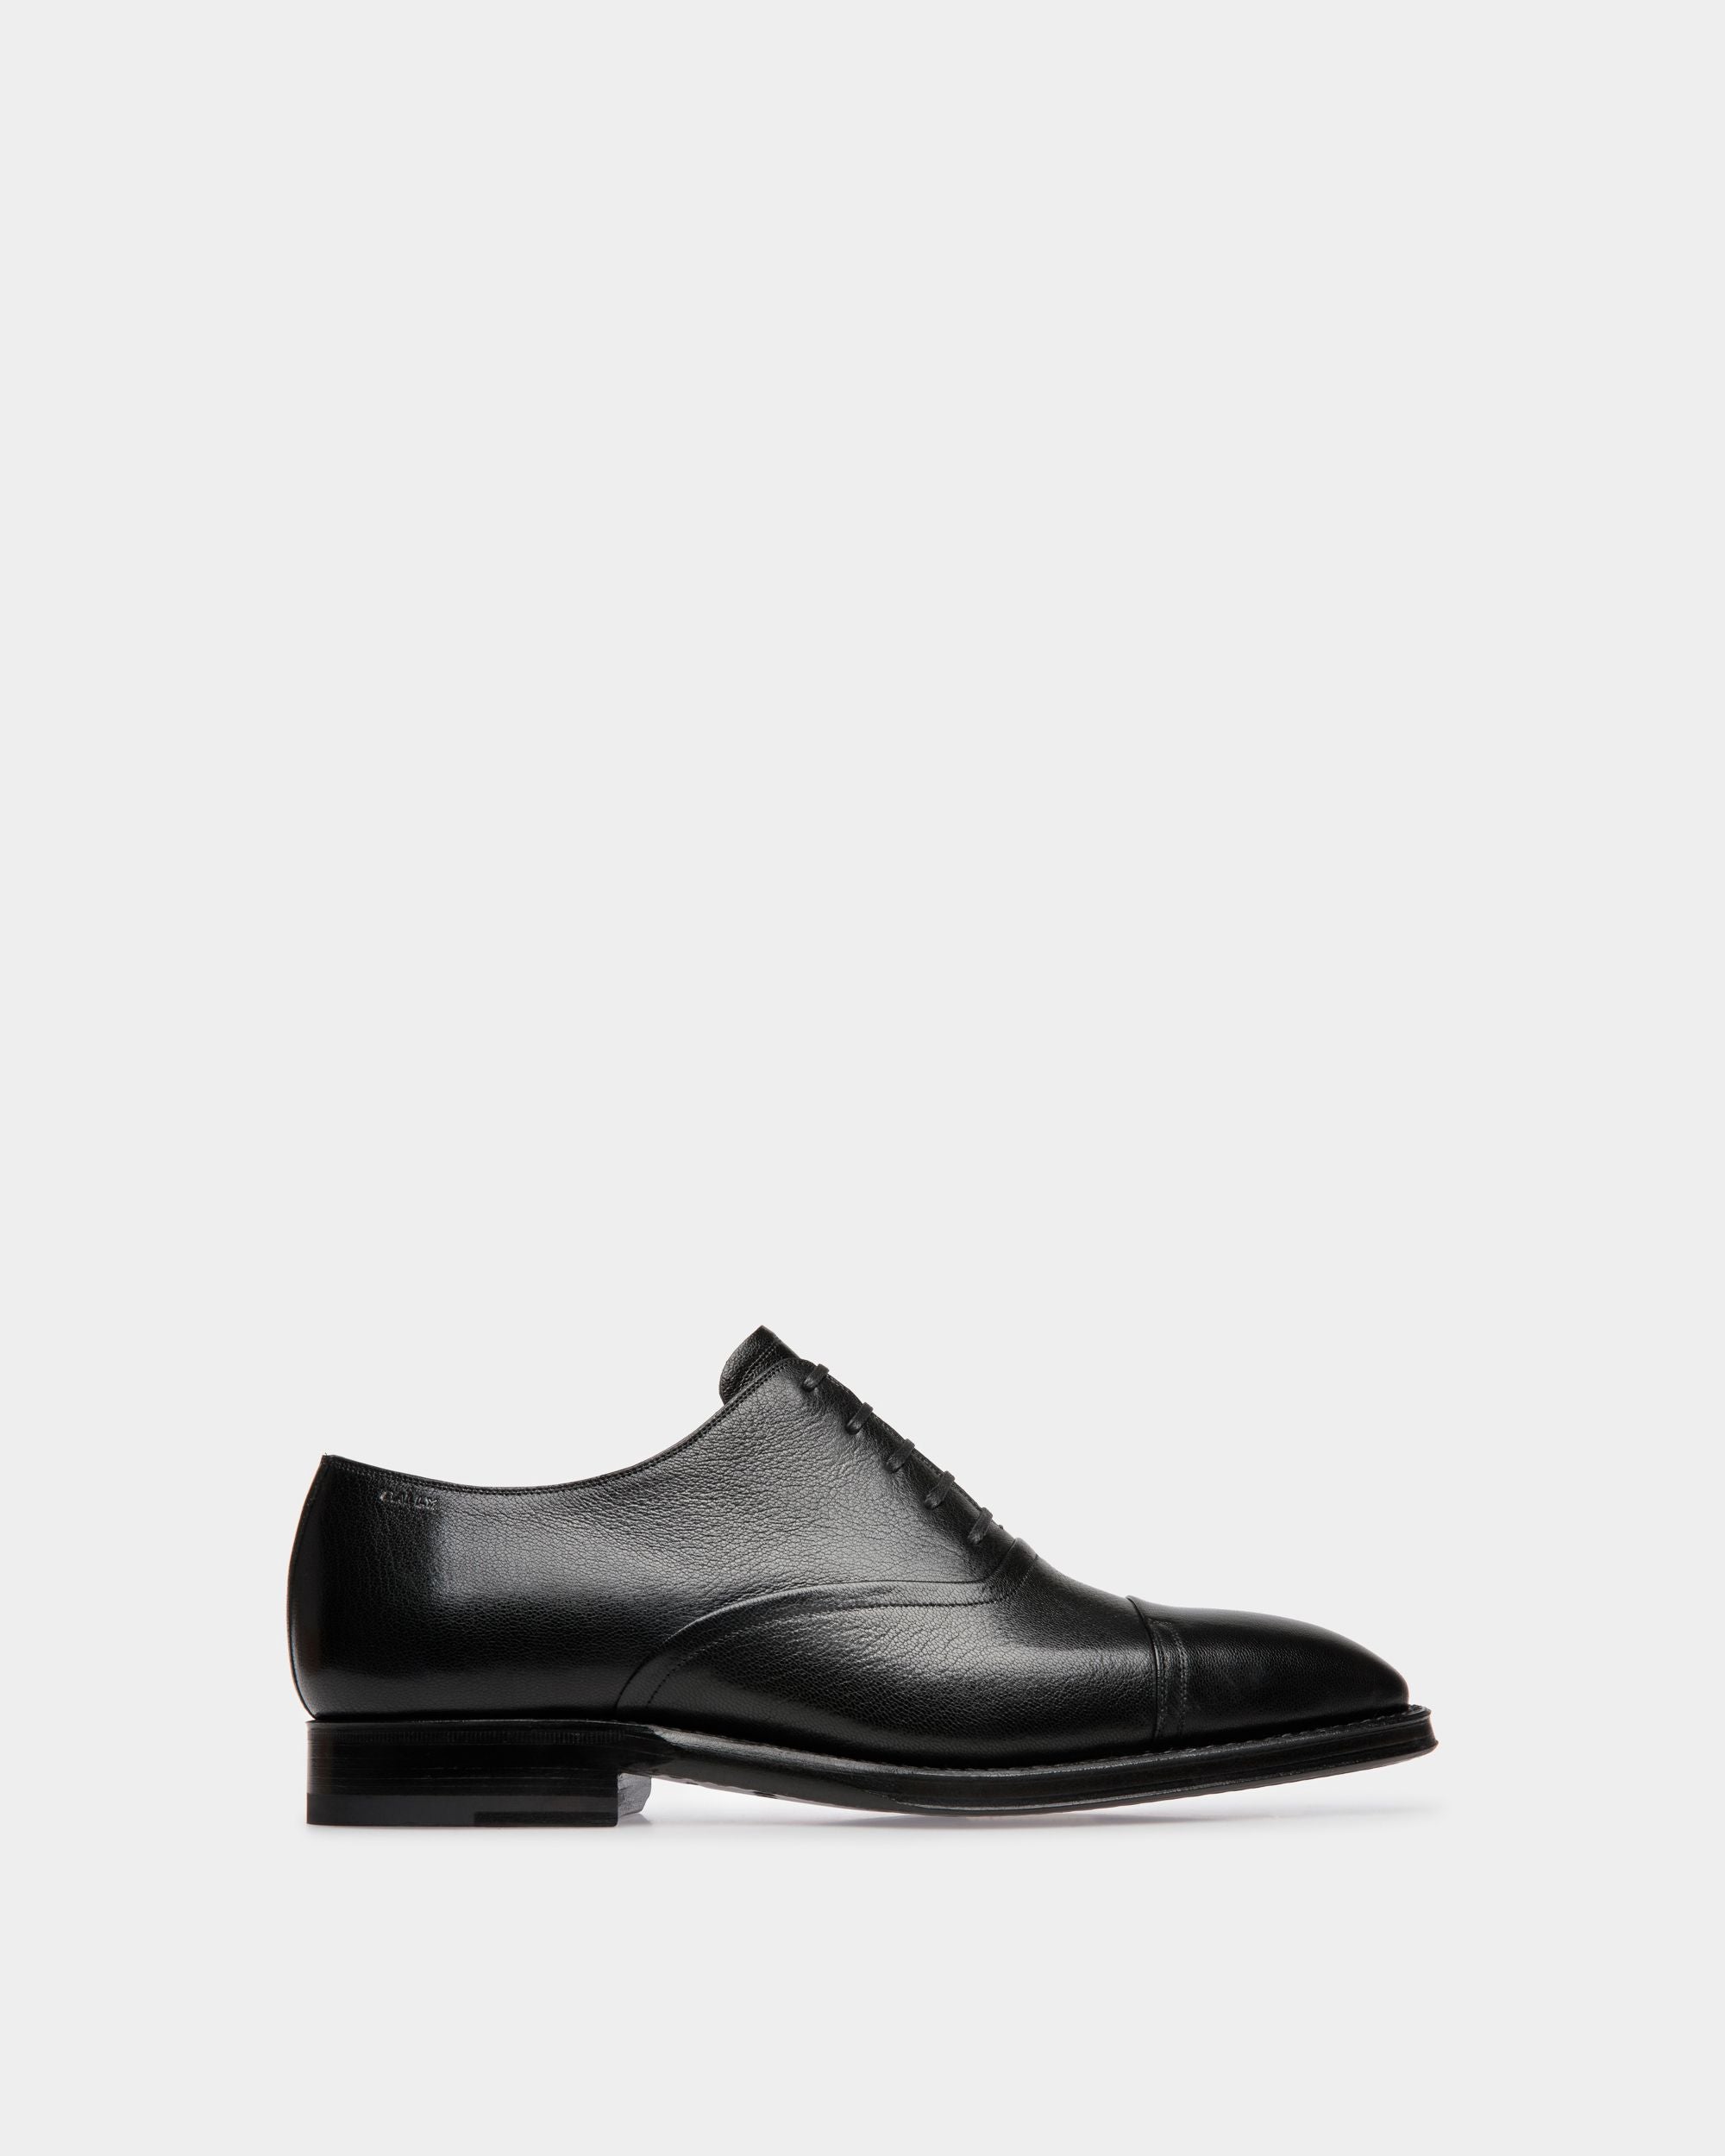 Scribe | Men's Oxford in Black Grained Leather | Bally | Still Life Side